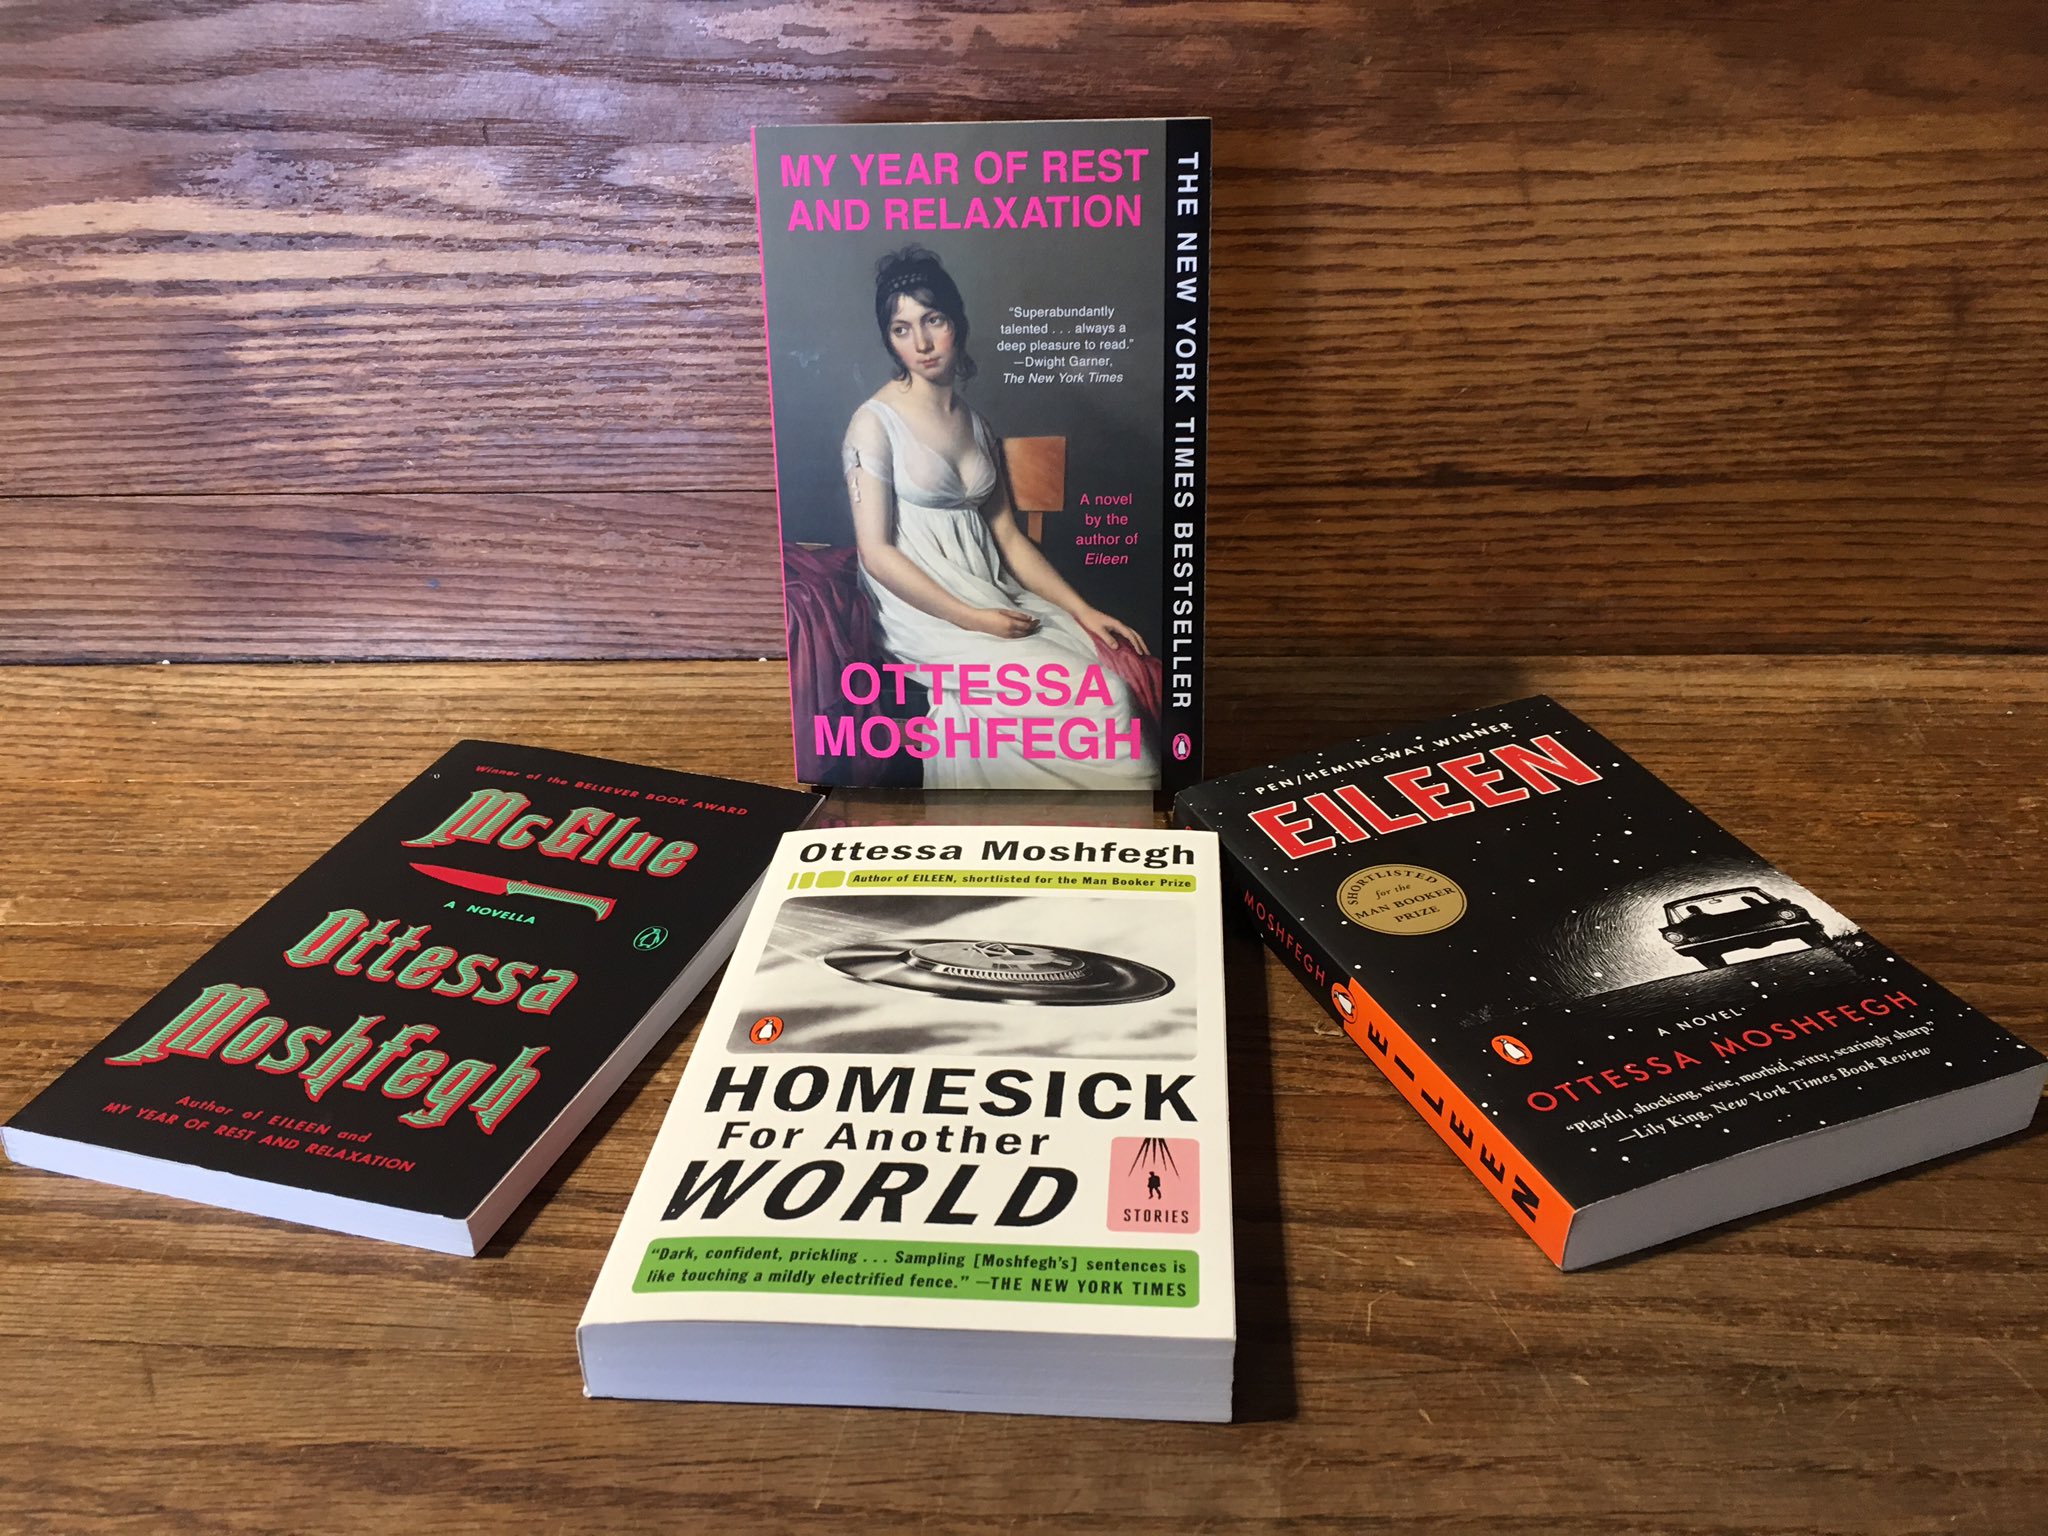 My Year of Rest and Relaxation by Ottessa Moshfegh, reviewed.